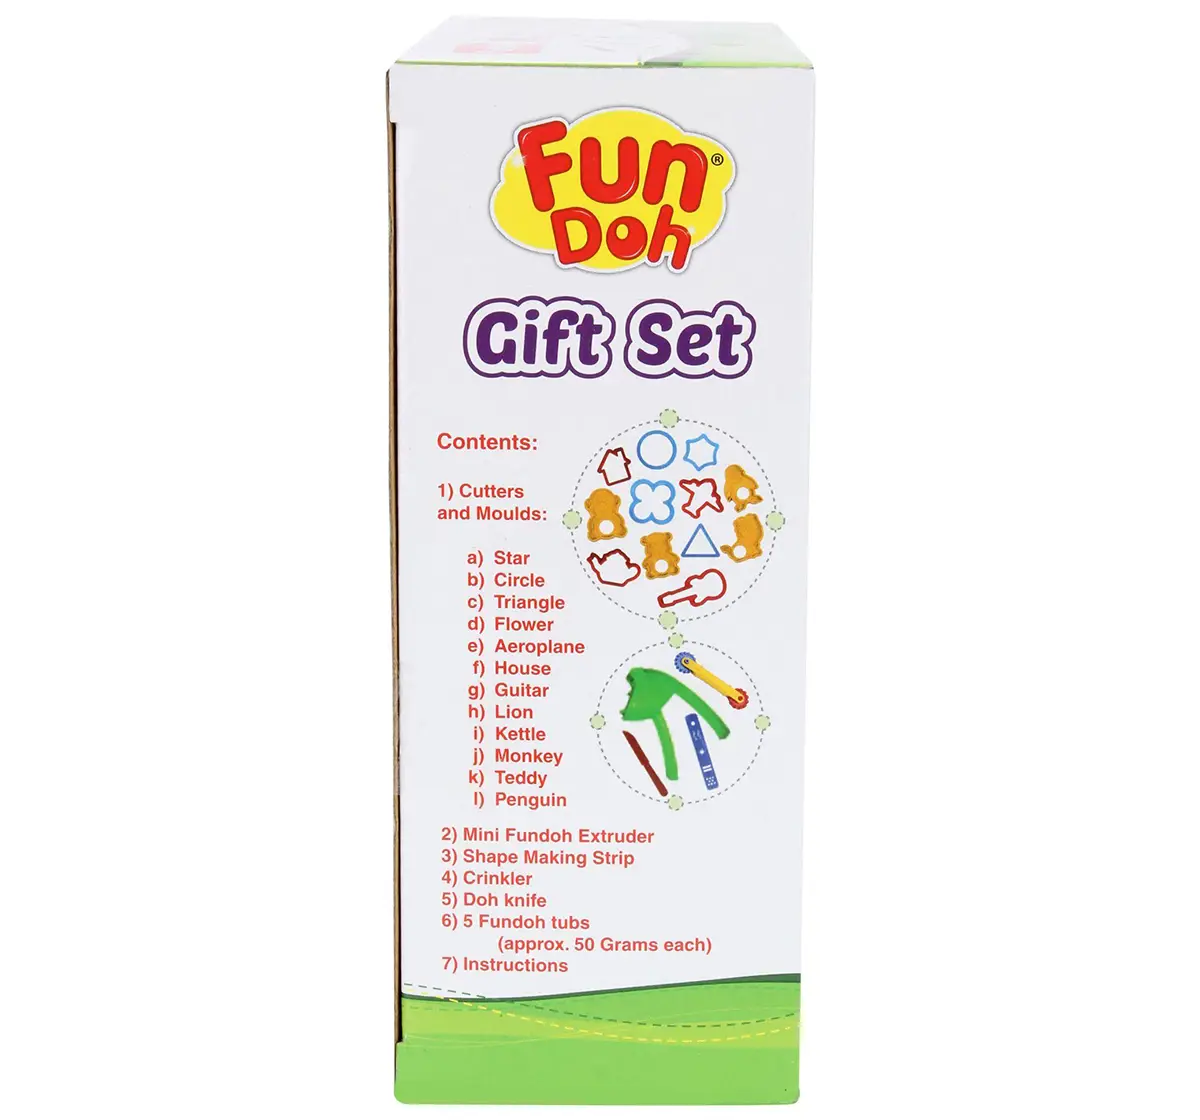 Giggles Gift Set Premium (9 Toys) From Funskool (Colors May Vary),Free  Shipping | eBay